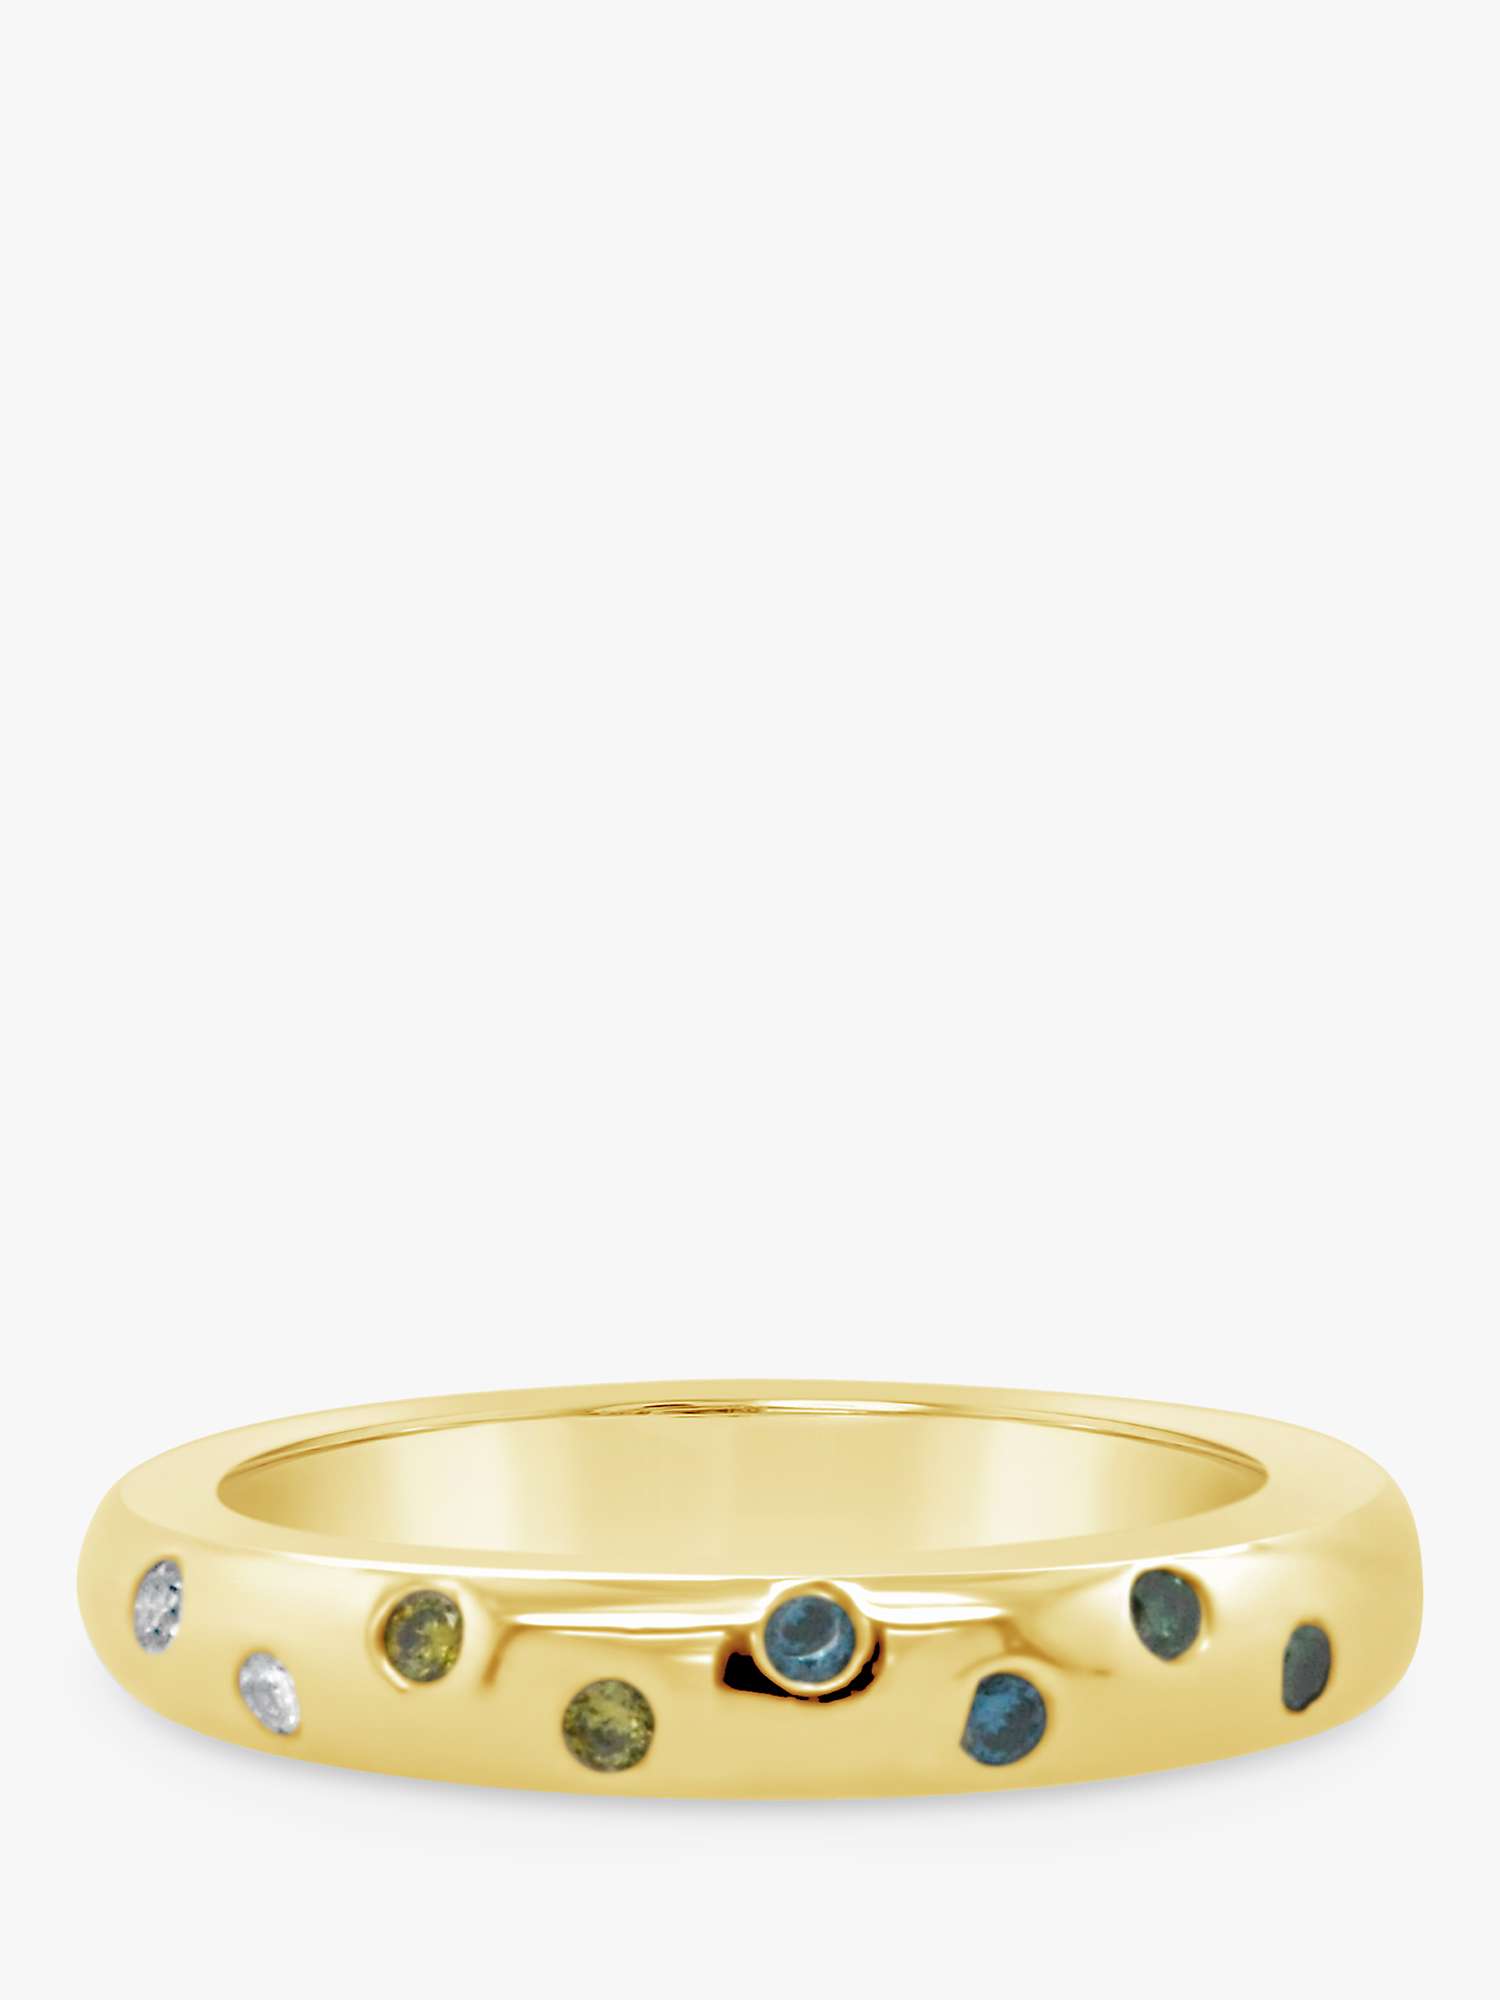 Buy Milton & Humble Jewellery Second Hand 14ct Yellow Gold Coloured Diamond Band Ring Online at johnlewis.com